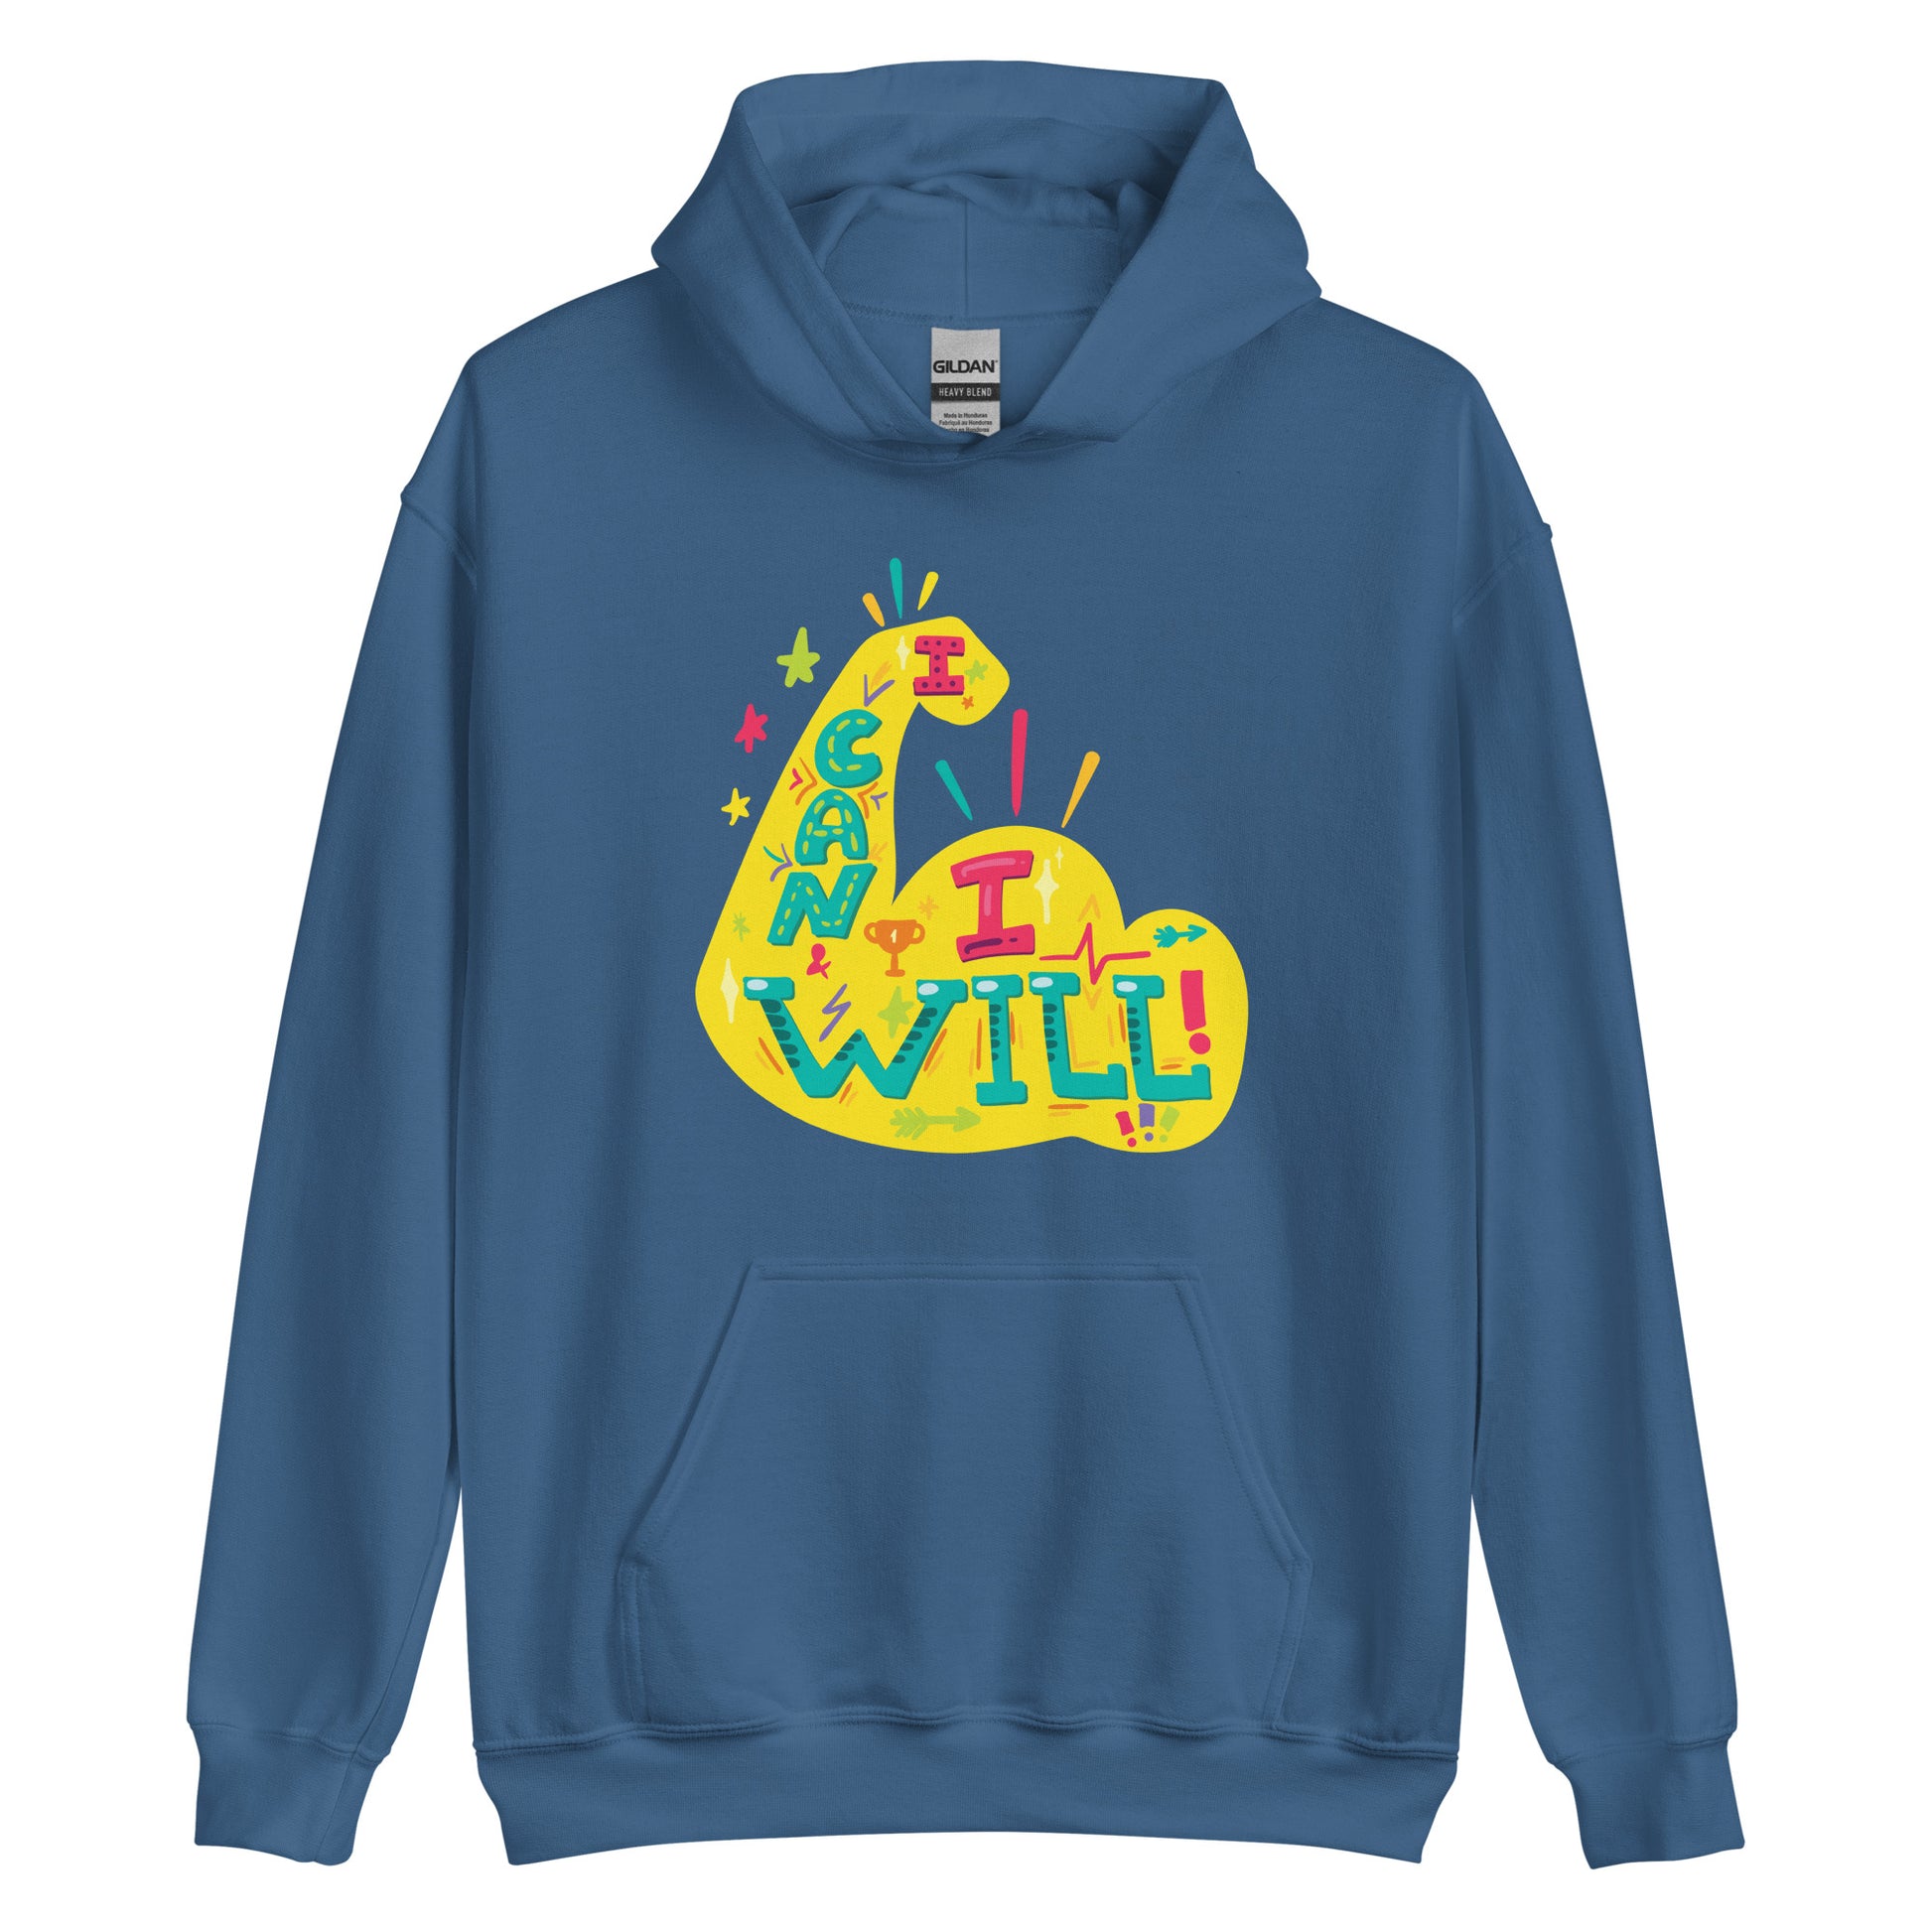 I can I will unisex Hoodie The Workout Inspiration